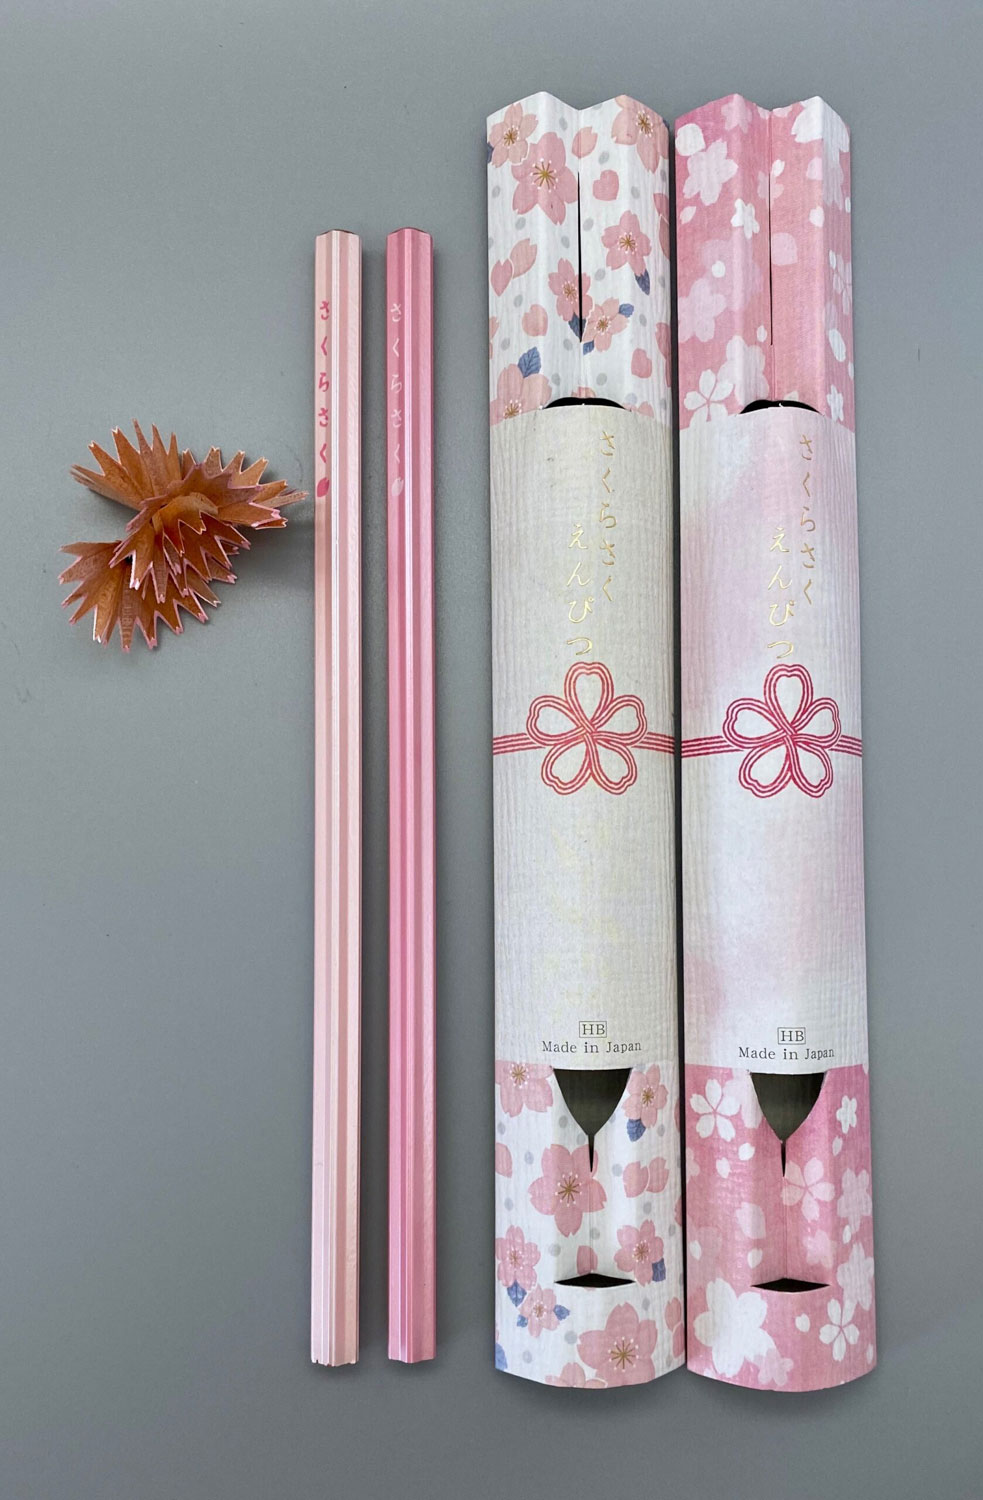 The Cherry Blossom pencil was born out of a design competition by Sun Star Stationary Company in Japan and took about a year and a half to bring to life.  The pencil shavings are designed to look like cherry blossom petals and the pencils come in a beautiful gift pack. Founded in 1952, Sun Star produce a variety of stationery items in Japan. Made in Japan.